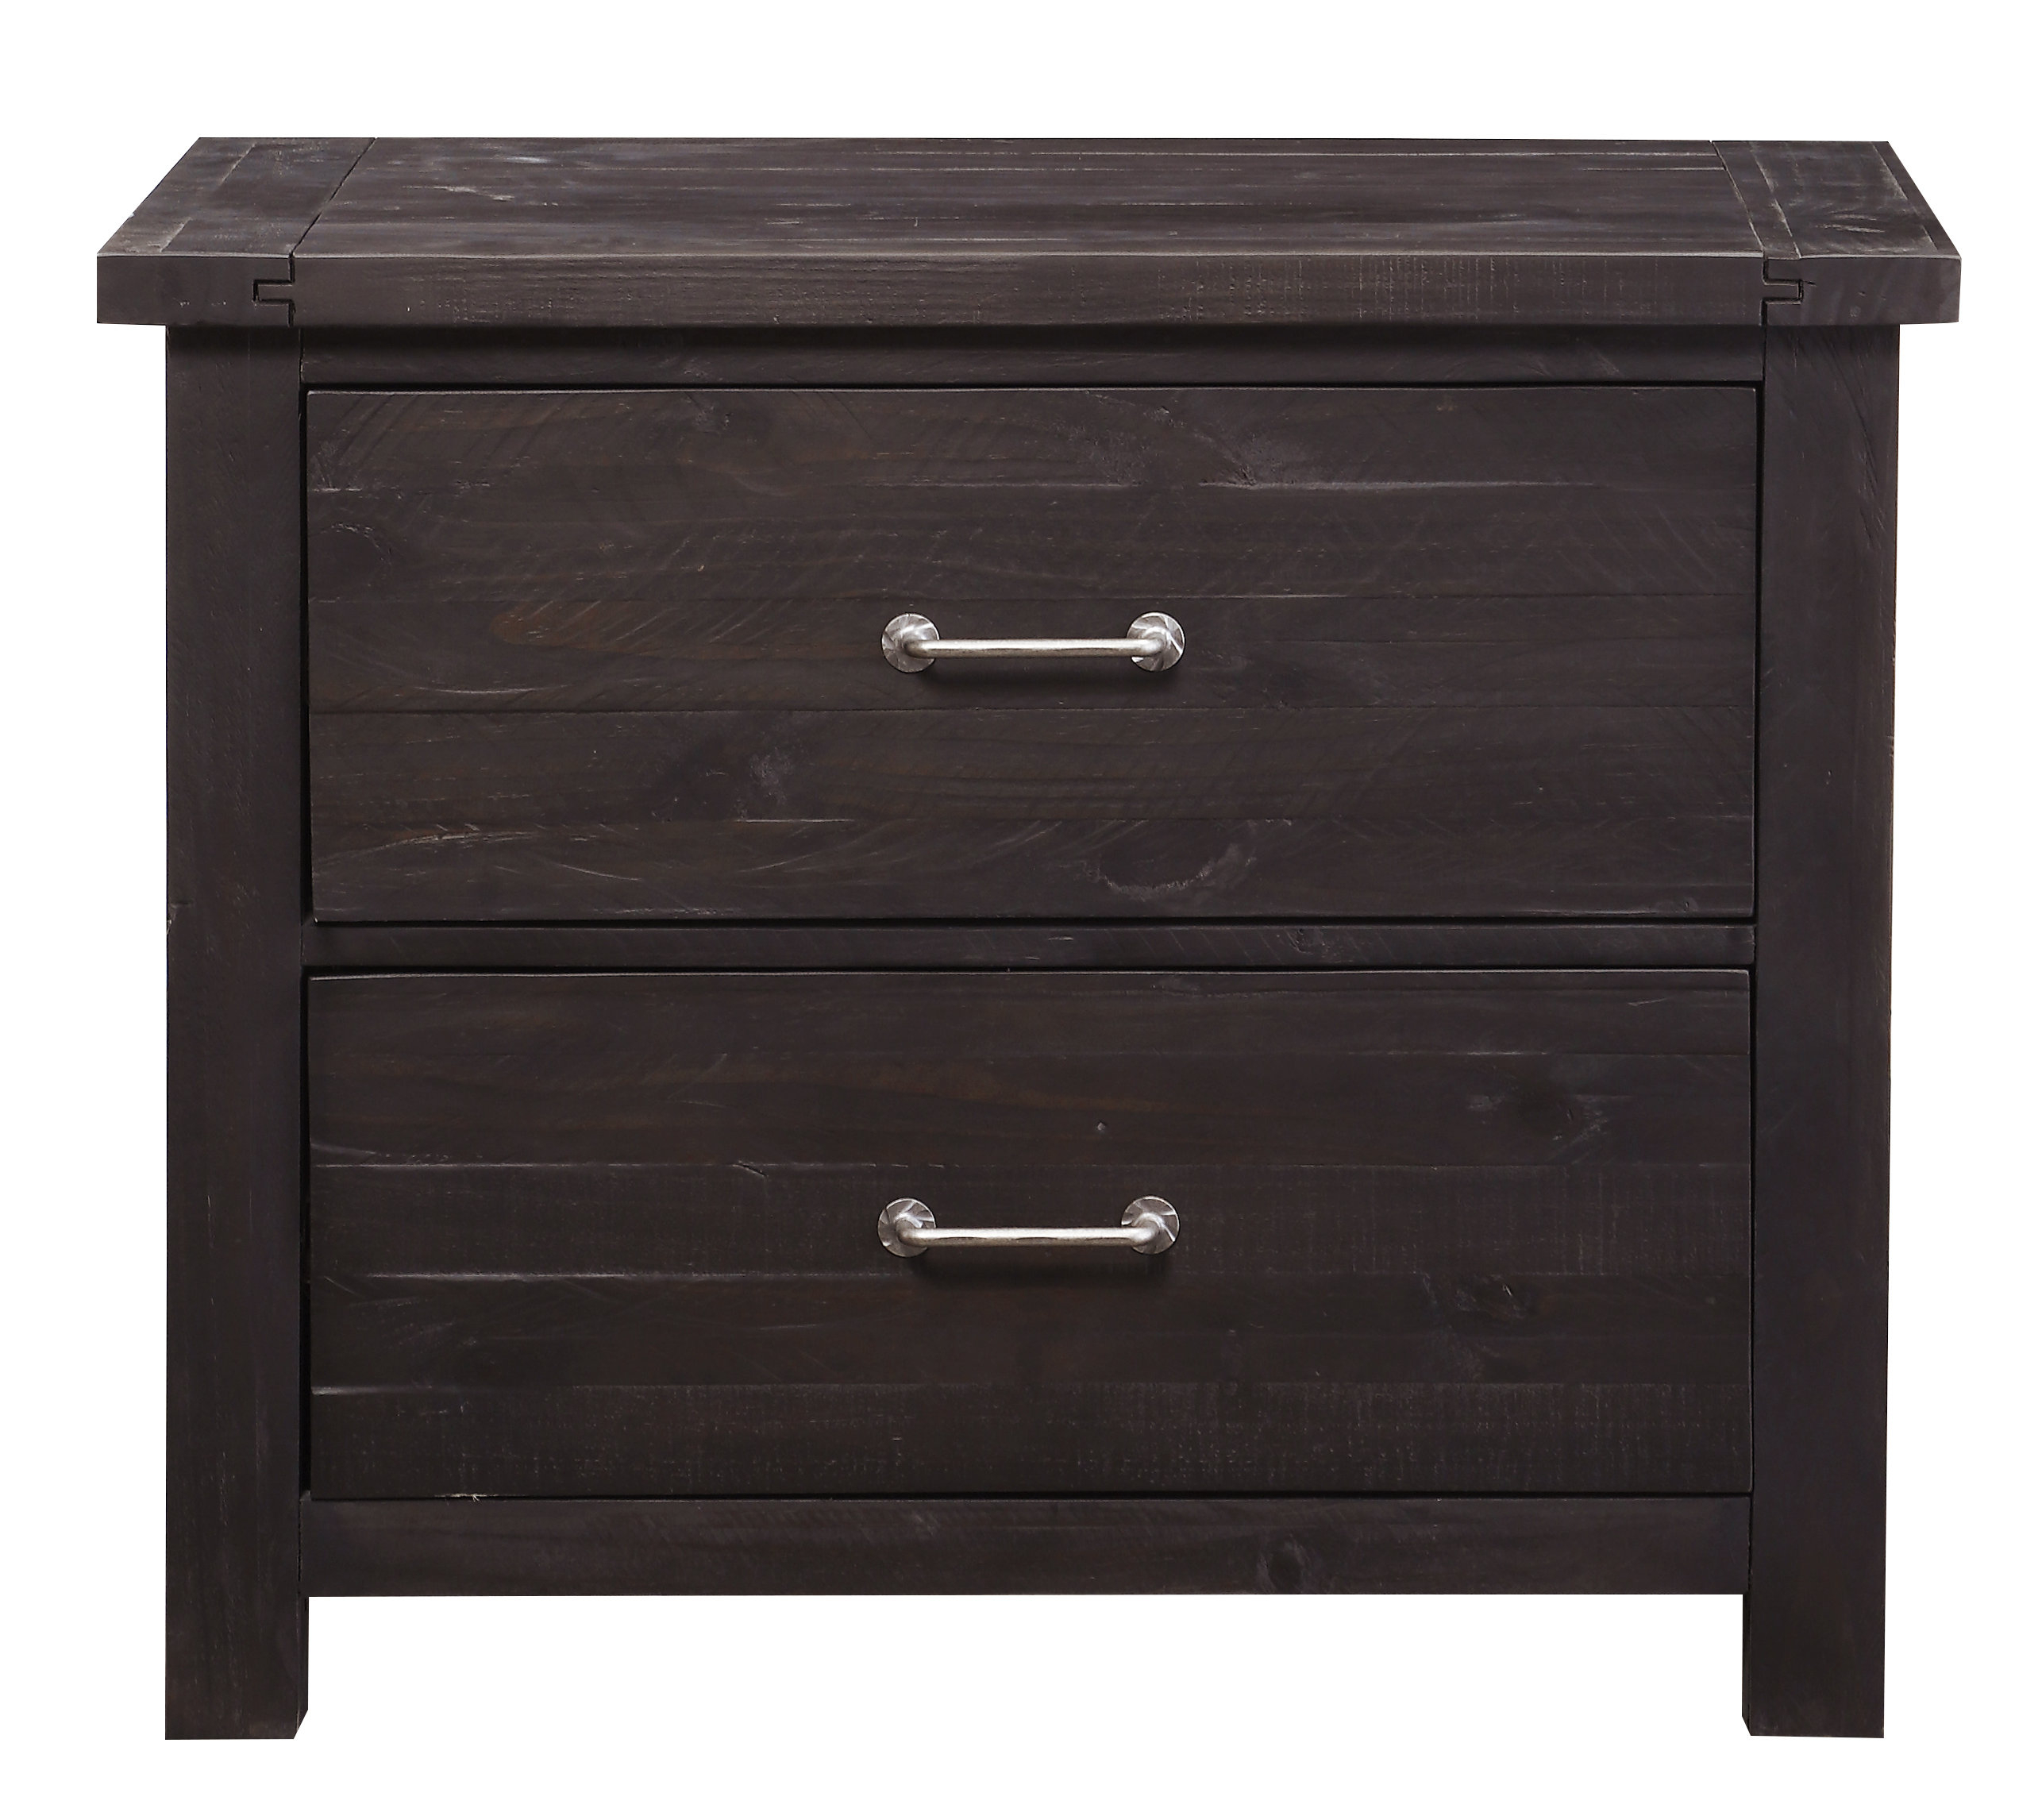 Langsa Solid Wood 2 Drawer Lateral Filing Cabinet Allmodern throughout sizing 2572 X 2292